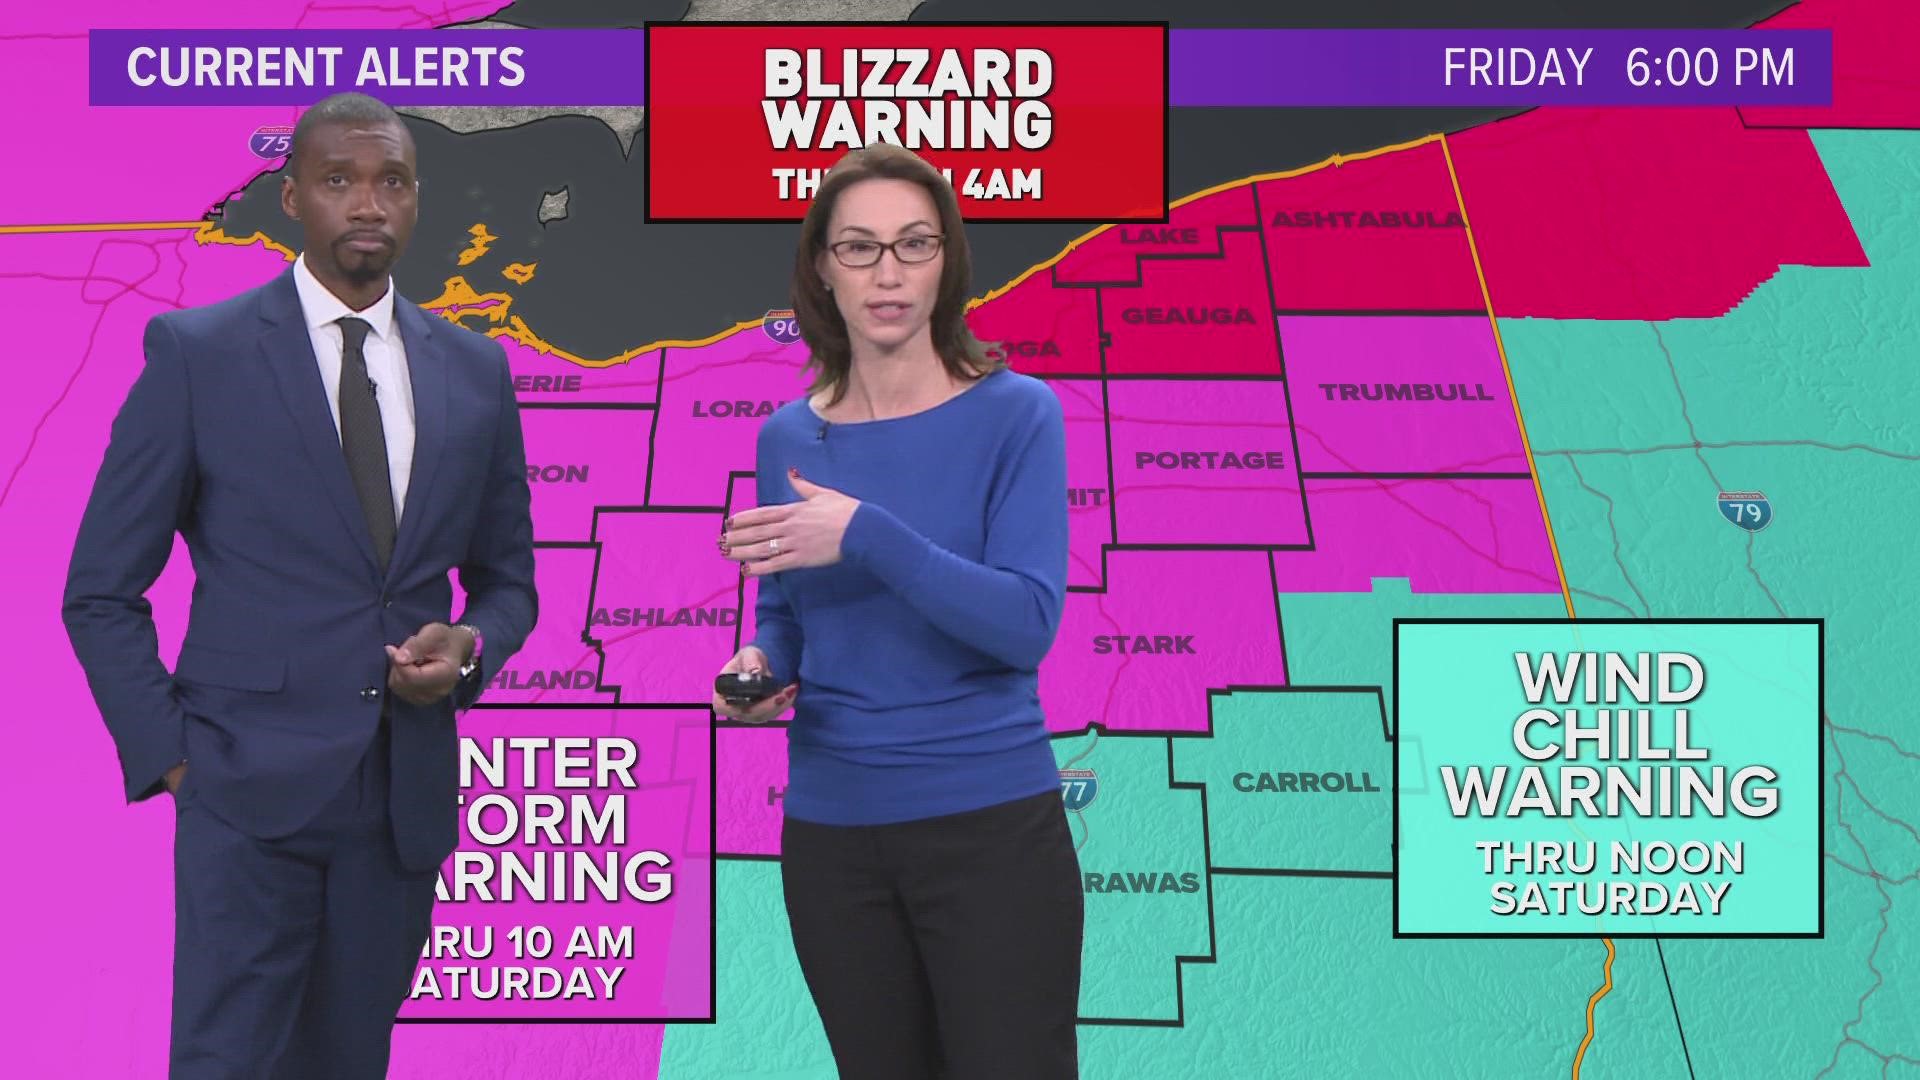 The last time Cleveland had a blizzard warning was back on Dec. 26, 2012, according to the National Weather Service.